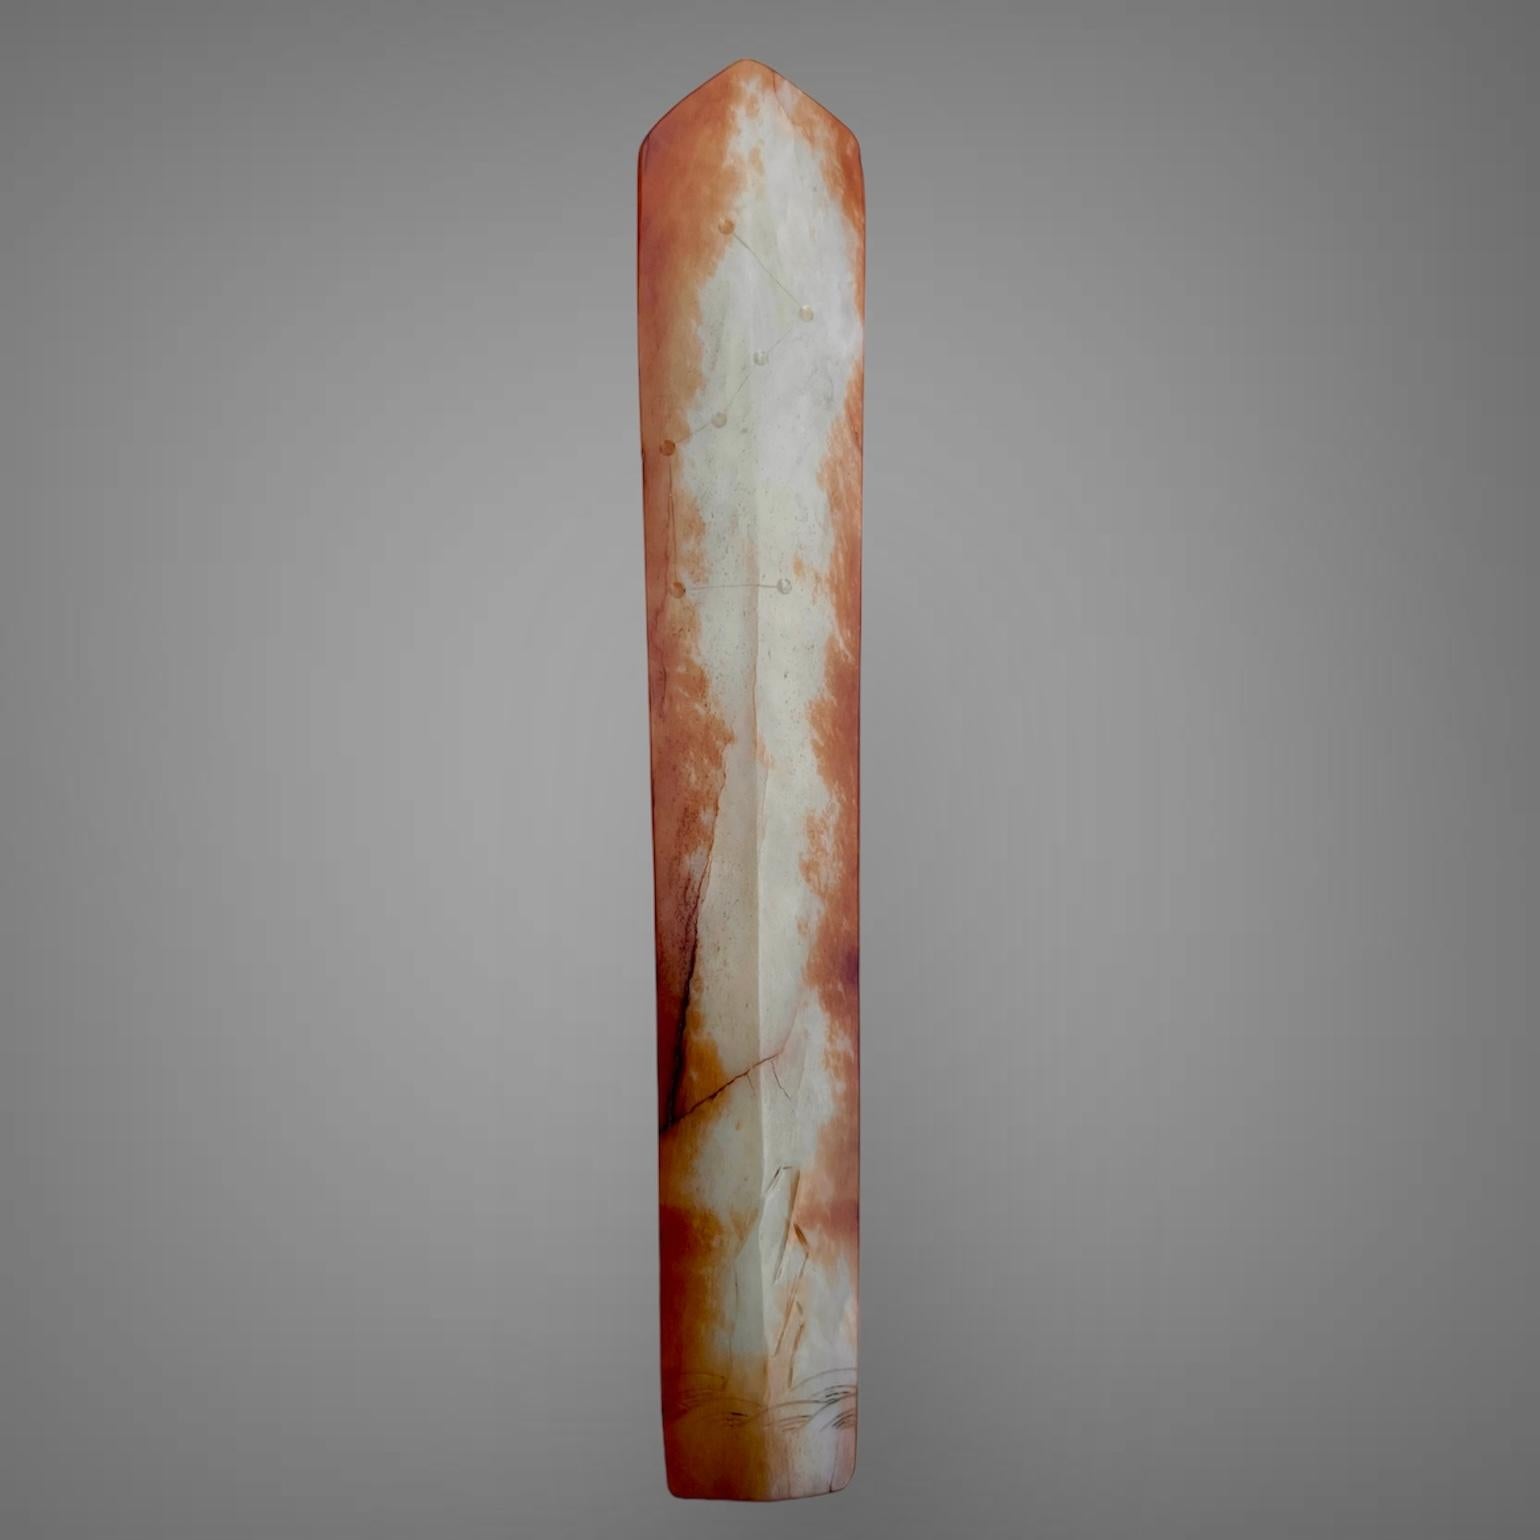 Archaistic jade gui (ritual sceptre).


China Ming or Qing dynasty, 16th-17th century AD


A gui, a rectangular tablet with a pointed end, was an emblem of office that was held upright with both hands in front of the chest.

They were first used